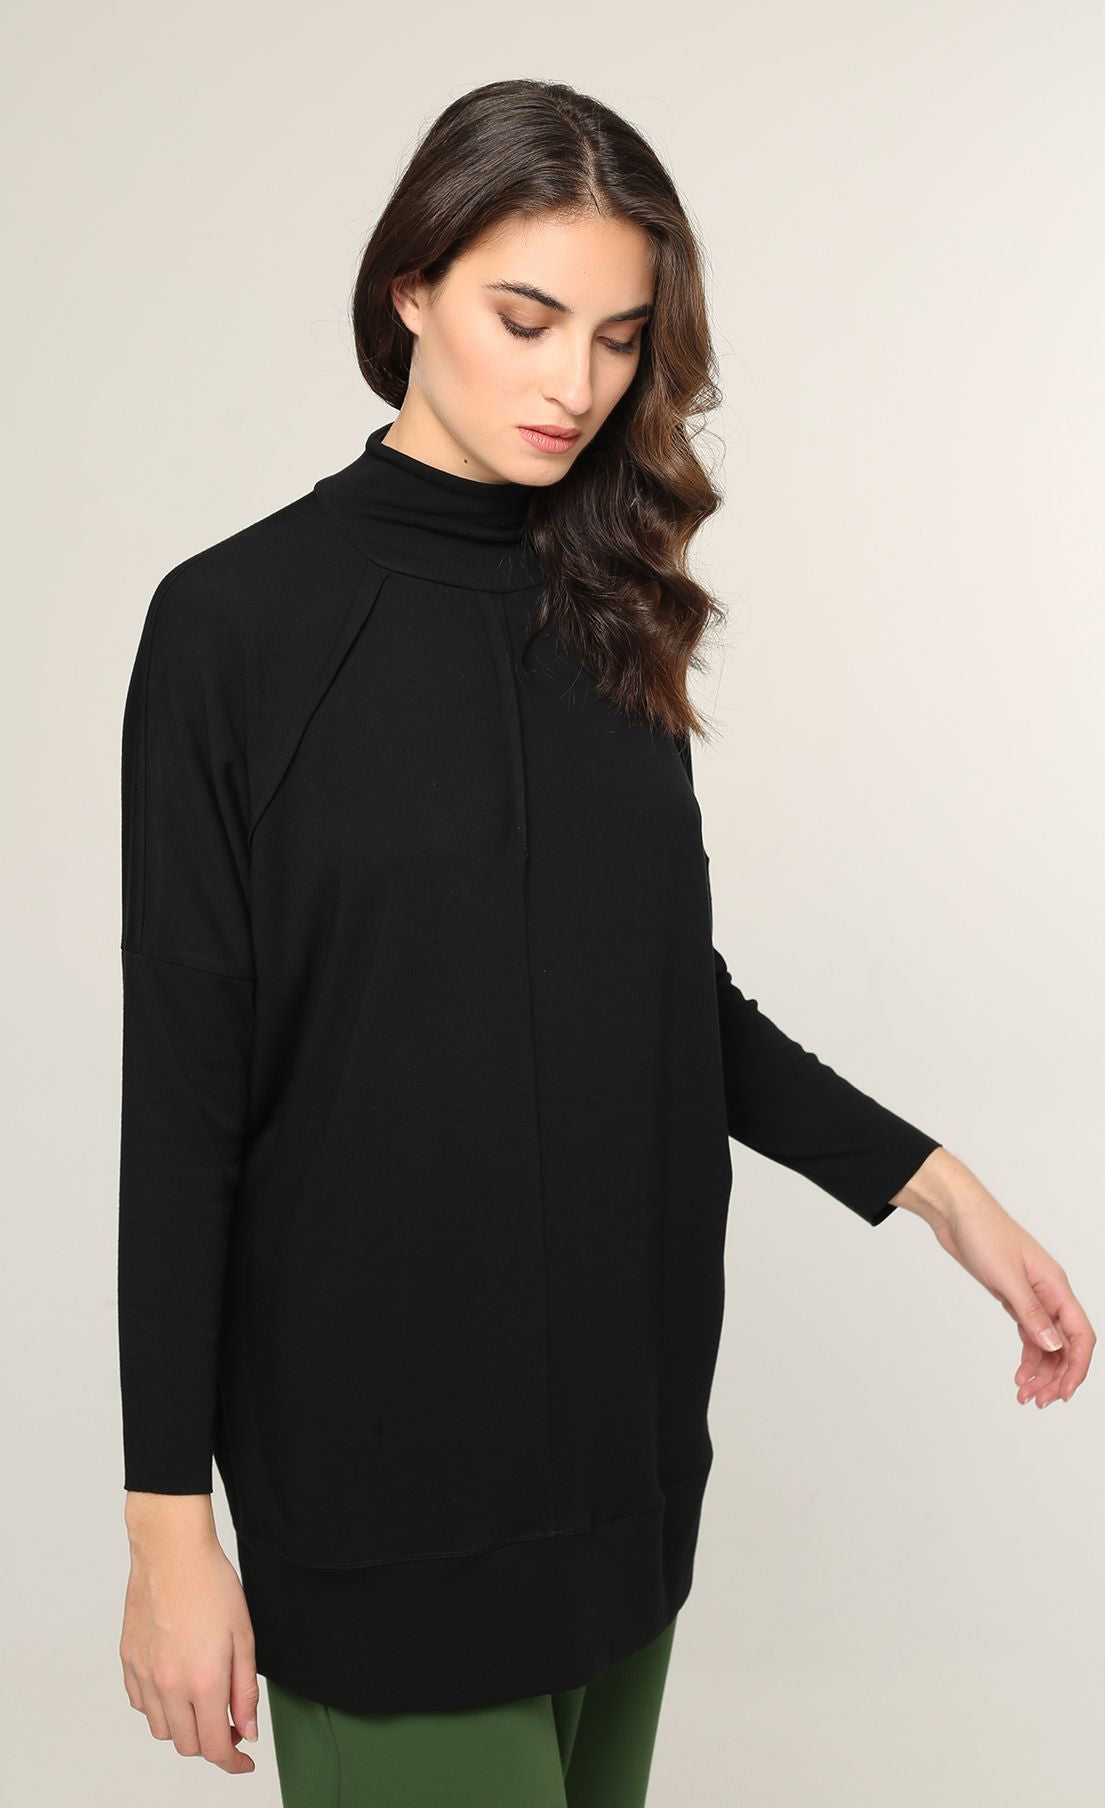 Front top half view of a woman wearing the ozai n ku black top. This top is solid black with long sleeves and drop shoulders. The top sits below the hips and features decorative seams and a high neck.